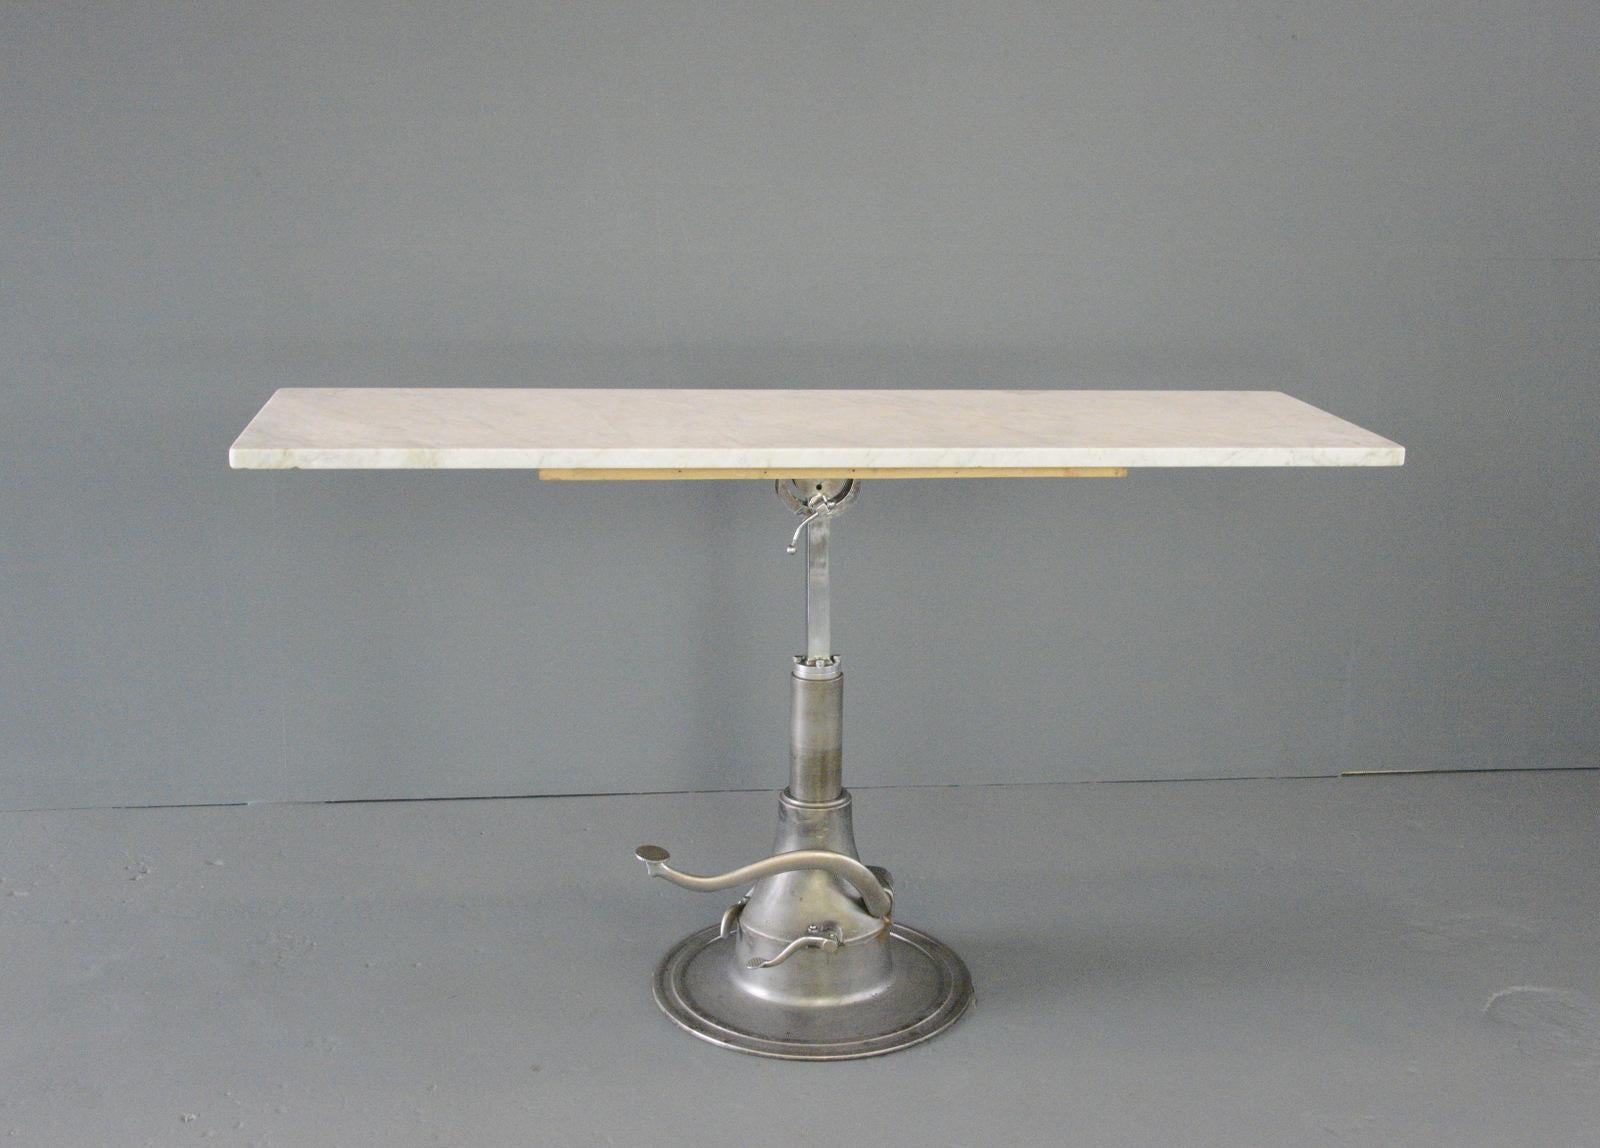 Marble Top Hydraulic Examination Table Circa 1930s

- Cast iron base
- Solid Carrara marble top
- Spins 360 and height adjustable
- Tilts
- English ~ 1930s
- 183cm wide x 56cm deep
- 83cm - 107cm tall

Condition Report

Fully restored with new